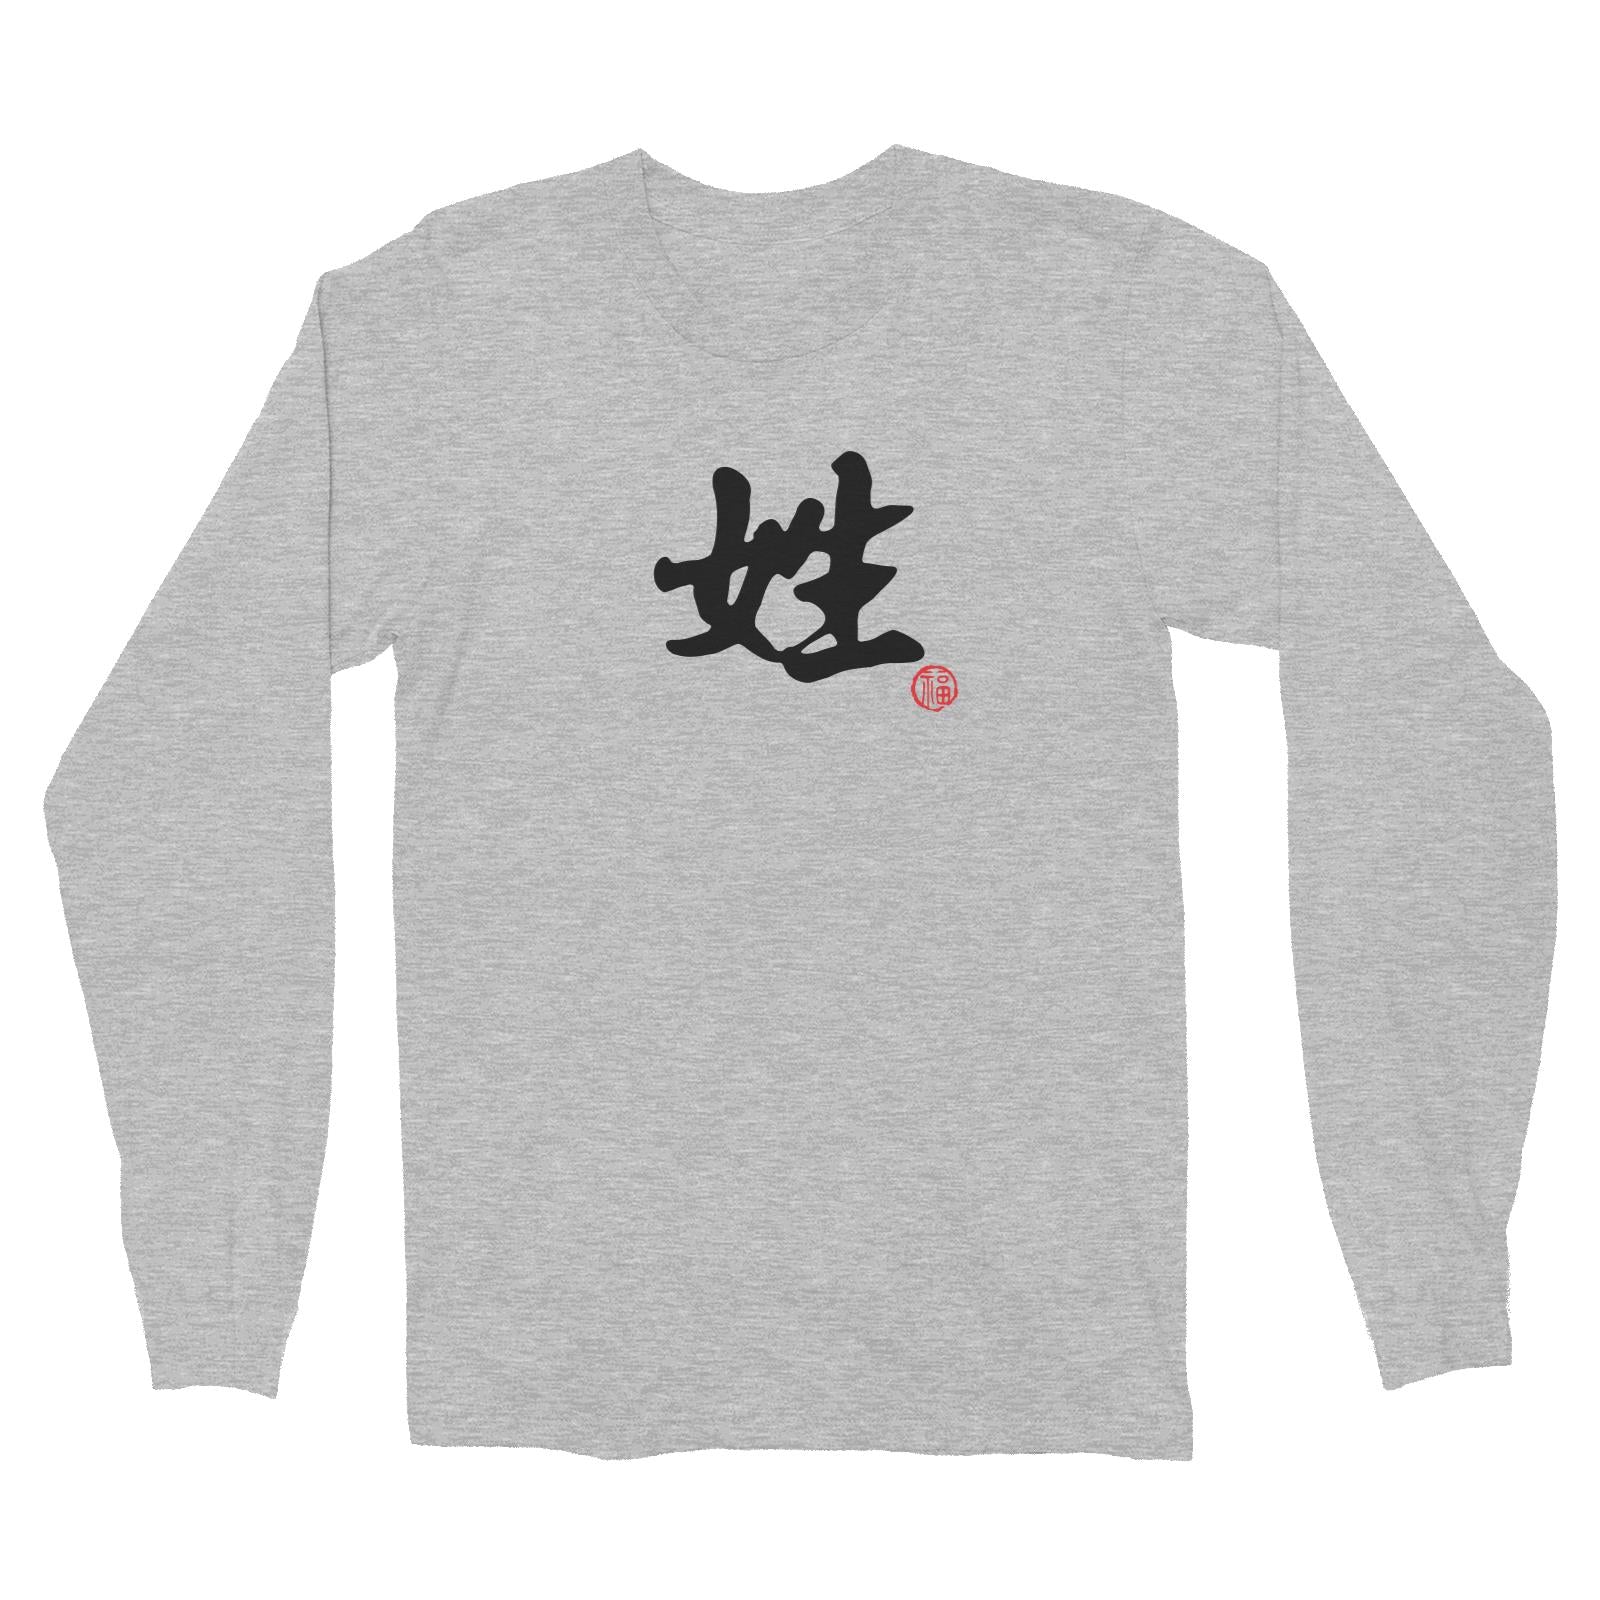 Chinese Surname B&W with Prosperity Seal Long Sleeve Unisex T-Shirt Matching Family Personalizable Designs